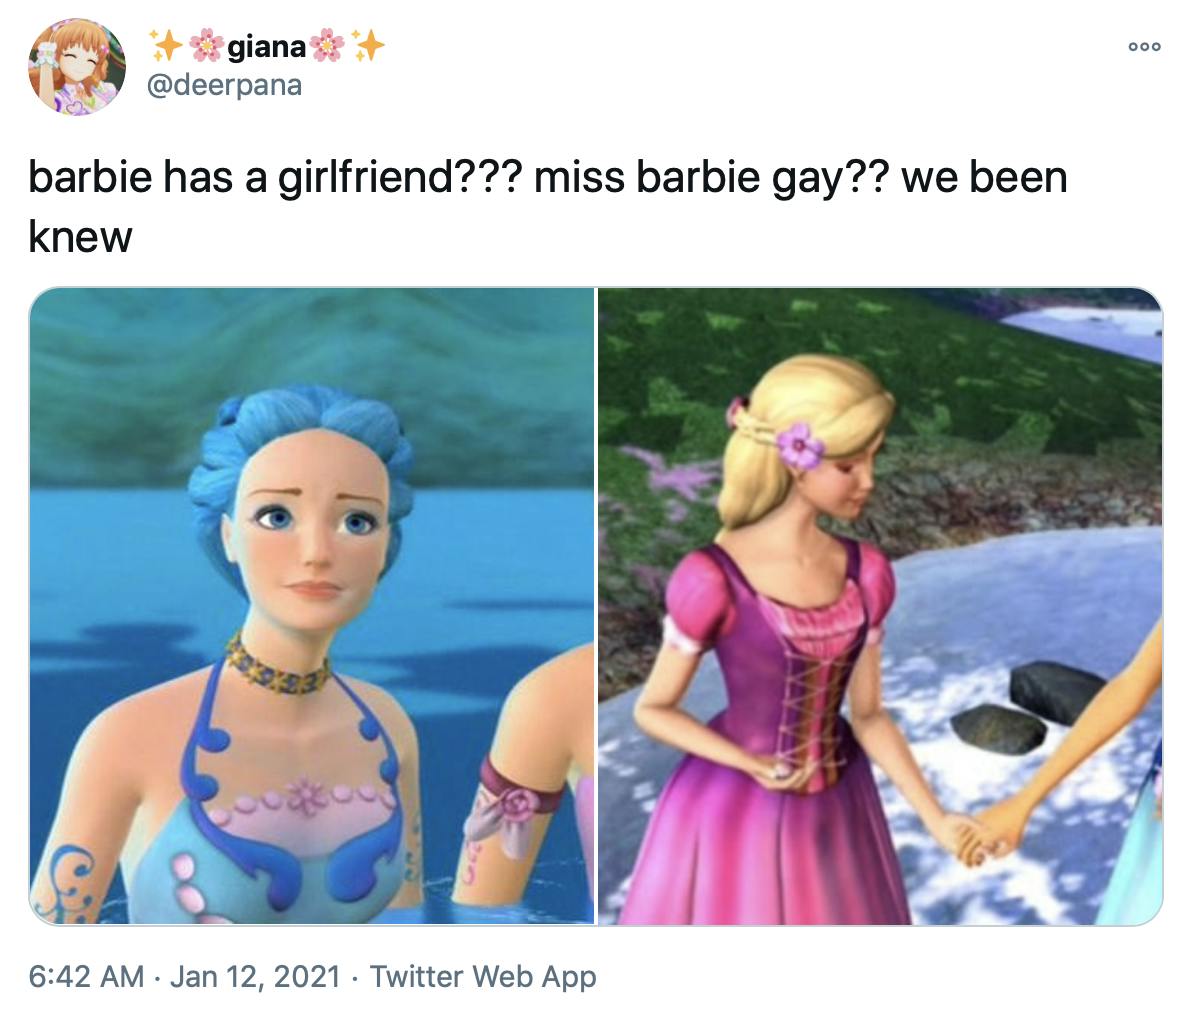 'barbie has a girlfriend??? miss barbie gay?? we been knew' screenshots from Barbie movies, on the left is a scene where Barbie holds hands with a blue haired mermaid in the water, on the right Barbie and a dark haired doll in a blue dress hold hands against a seascape